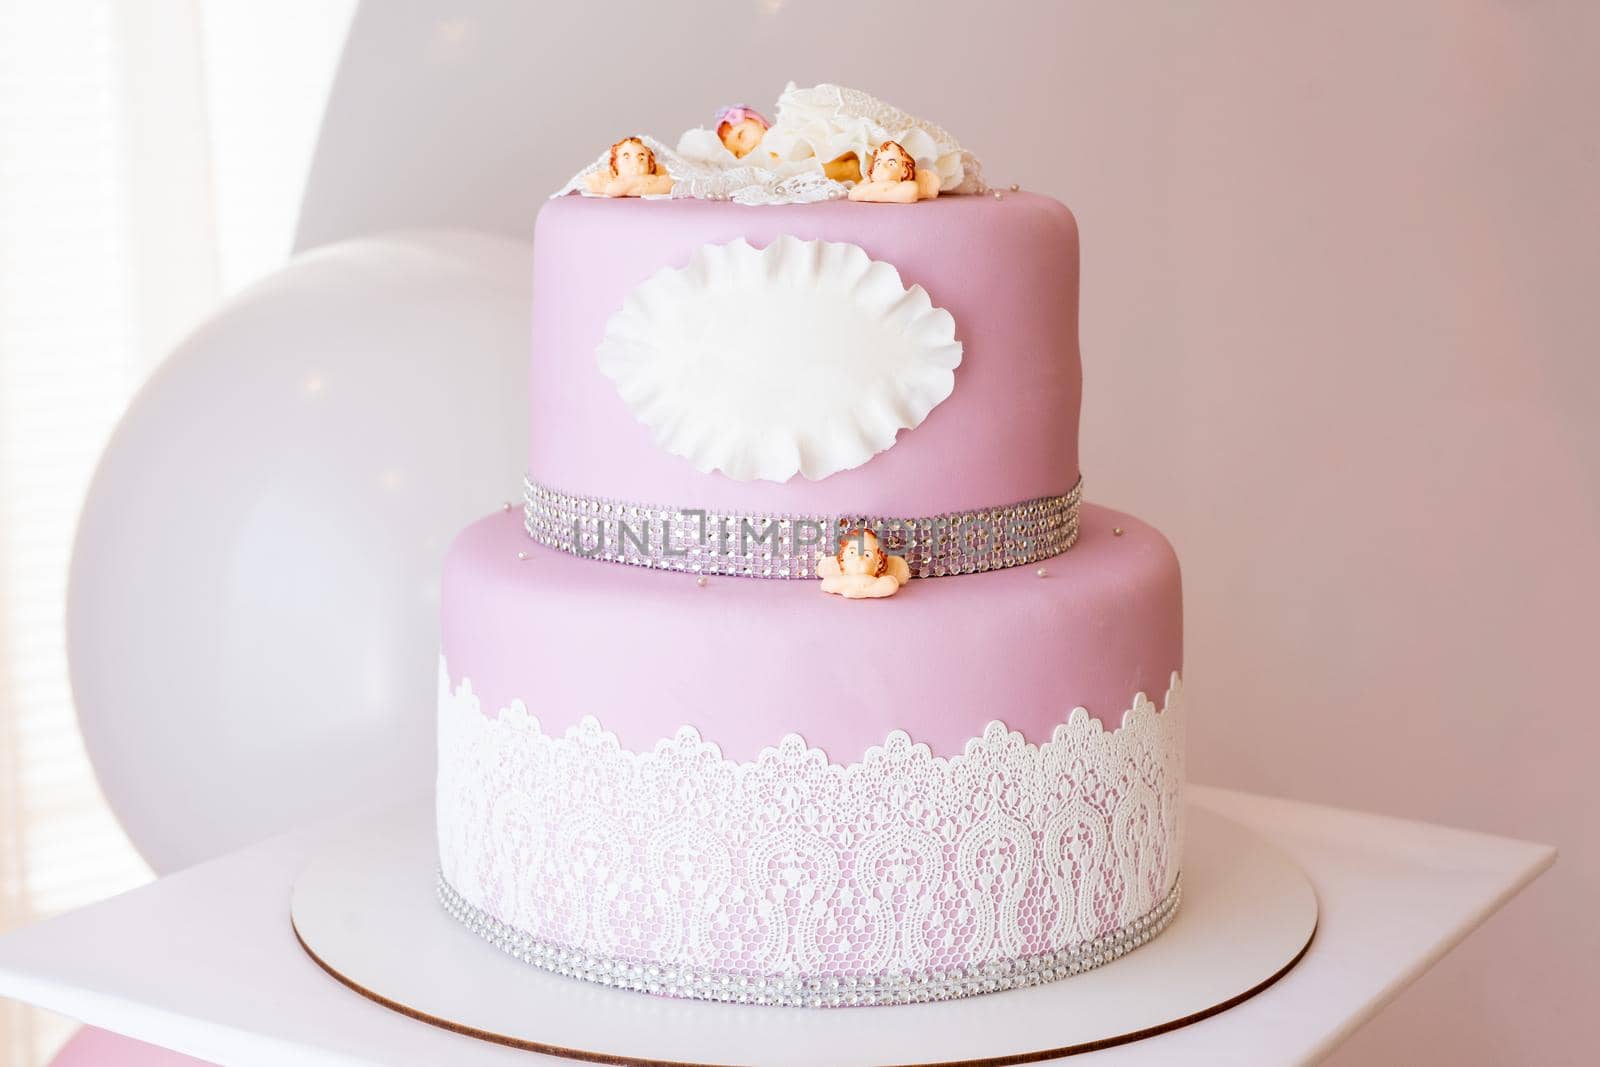 Two-tiered pink cake with a place for an inscription and little angels. Copy space by Serhii_Voroshchuk